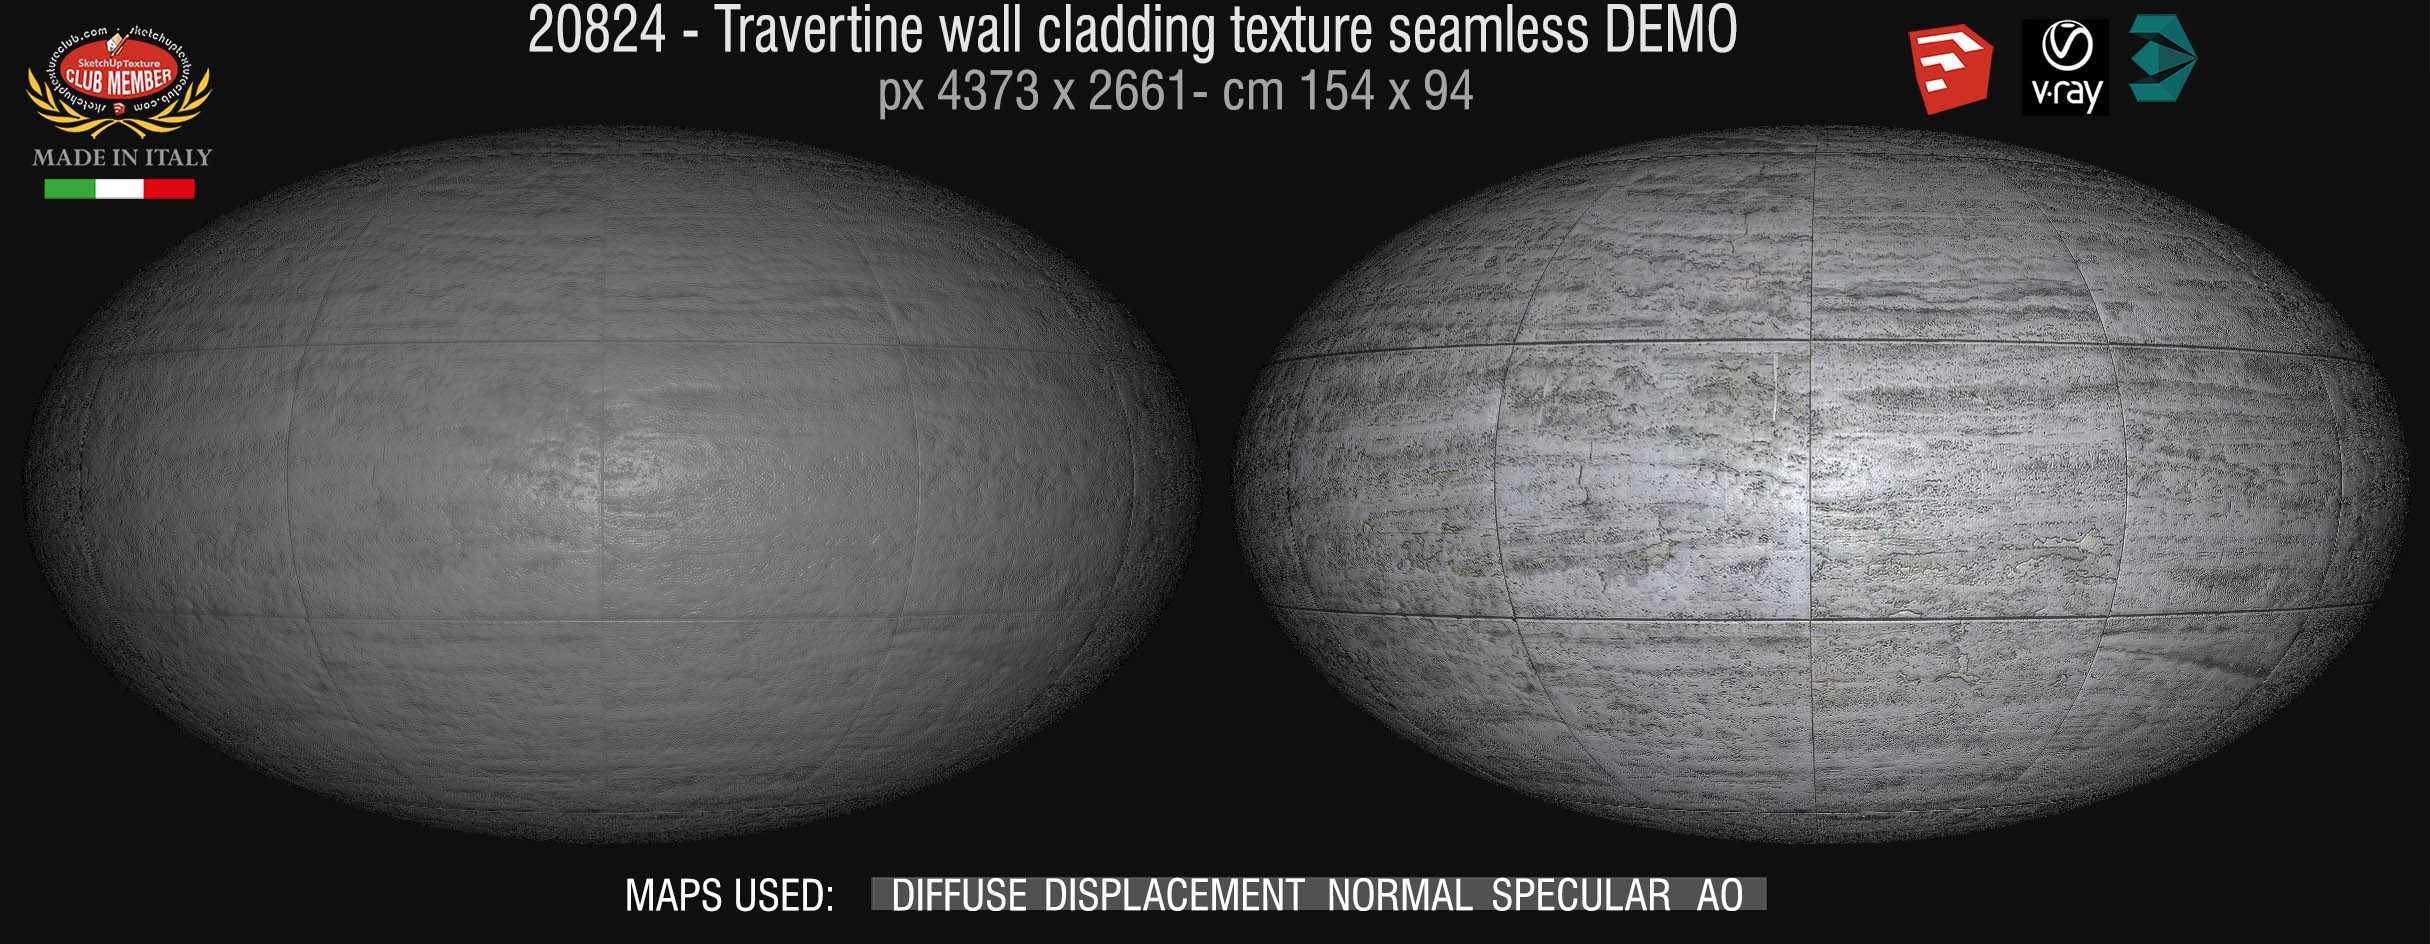 20824 Travertine wall cladding texture seamless and maps DEMO